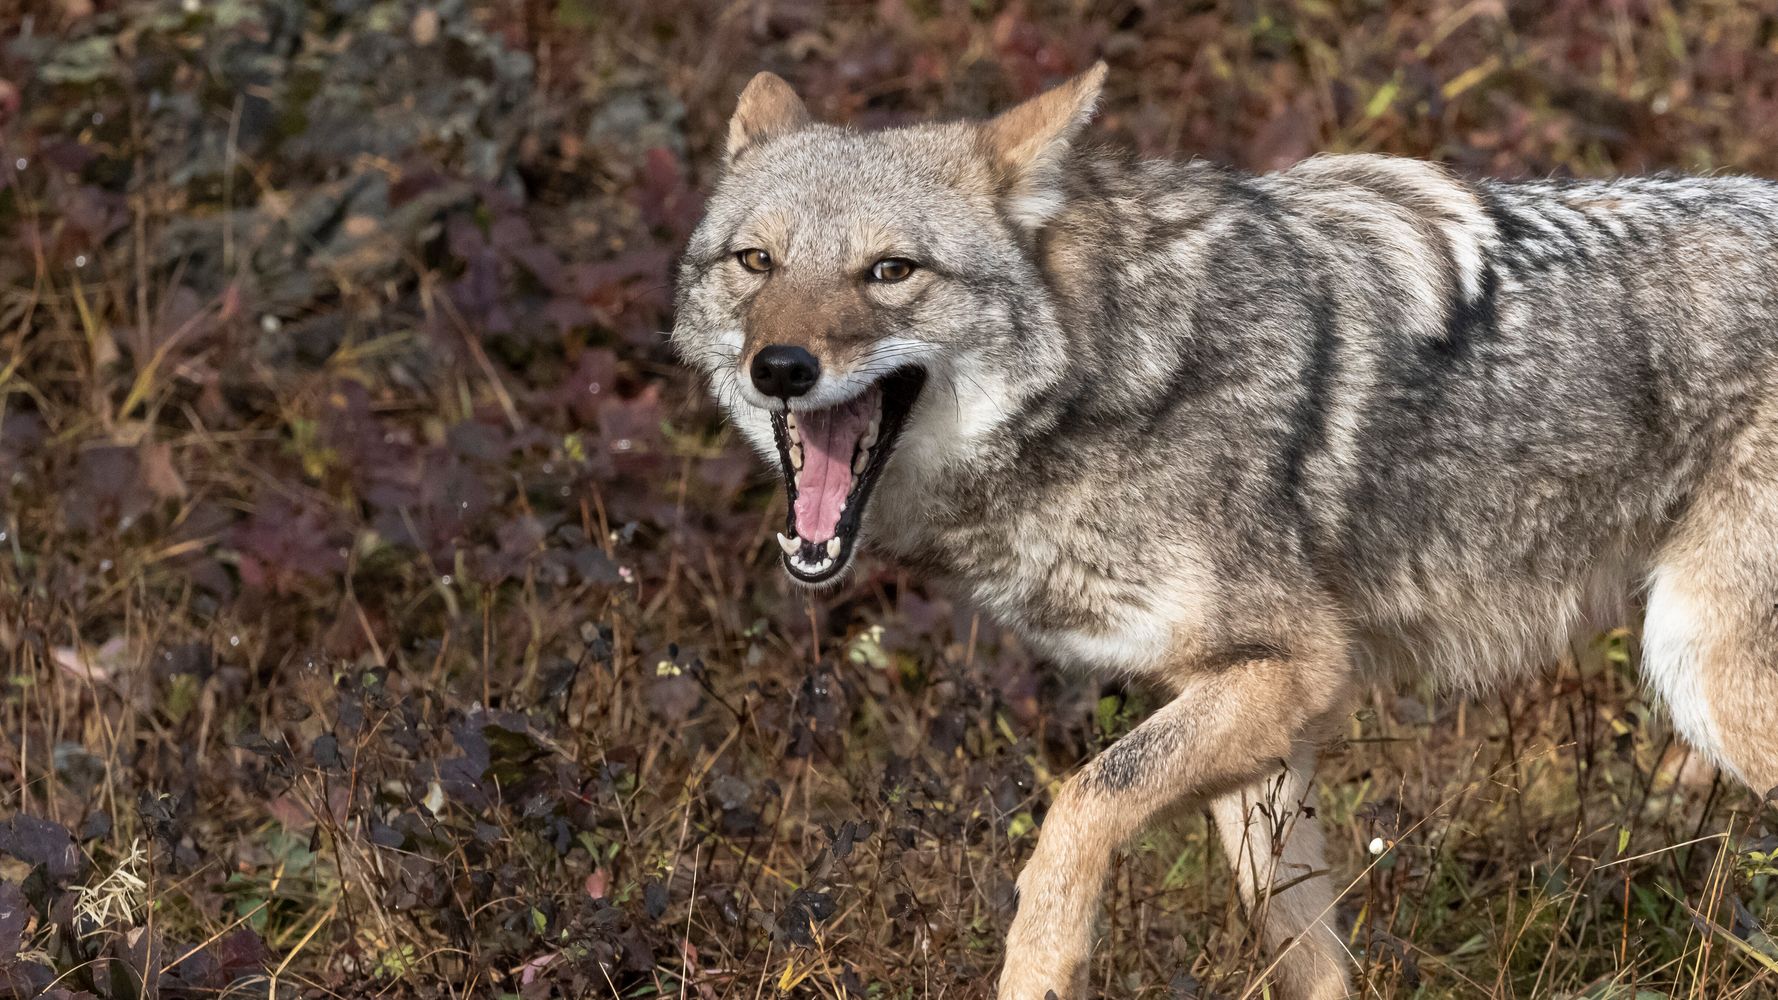 Coyote Attacks Child On Cape Cod Beach As Officials Warn Of Dangerous Encounters